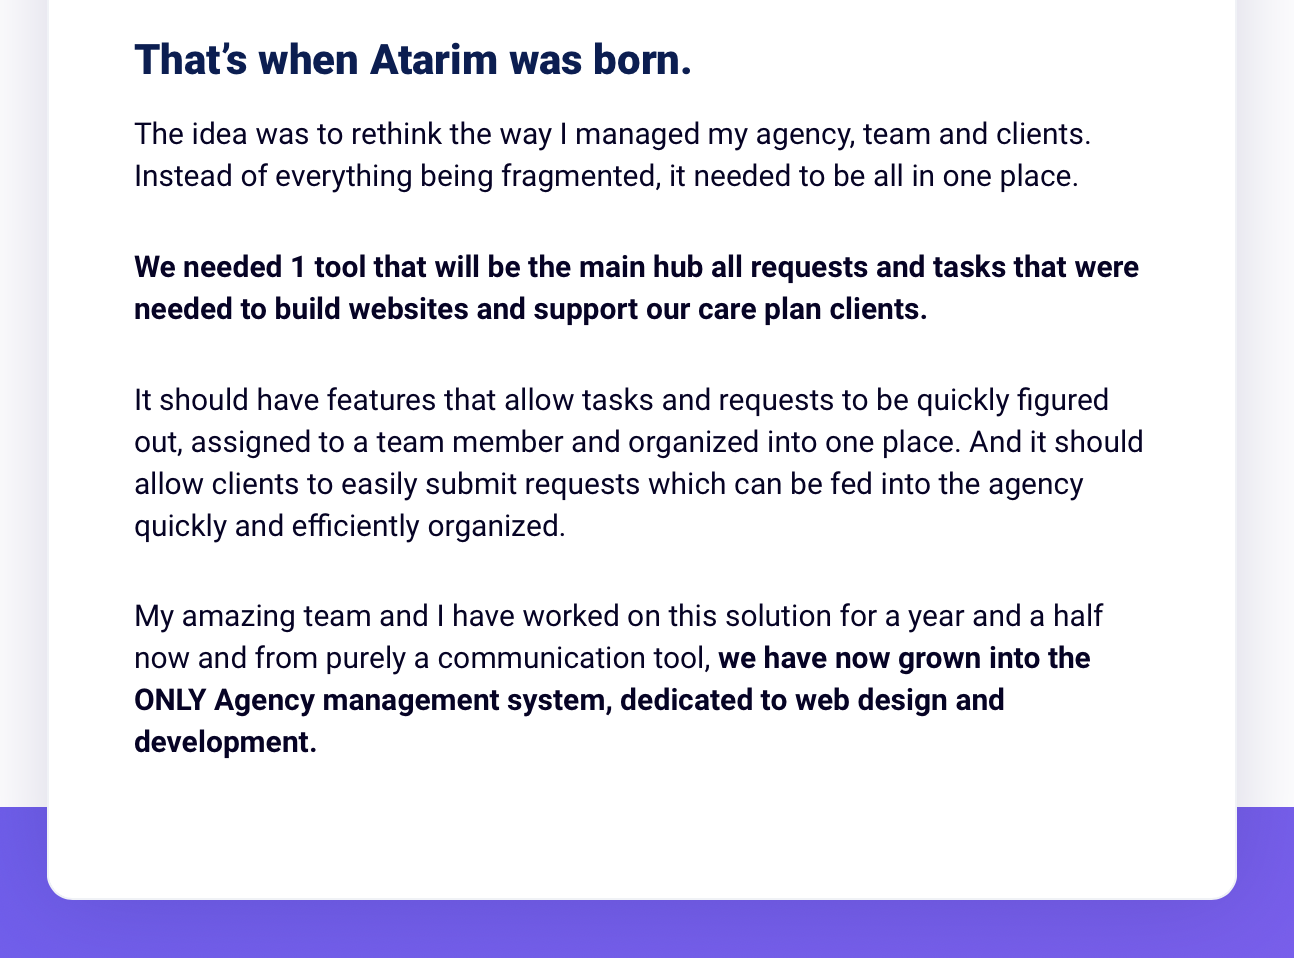 about us section Atarim